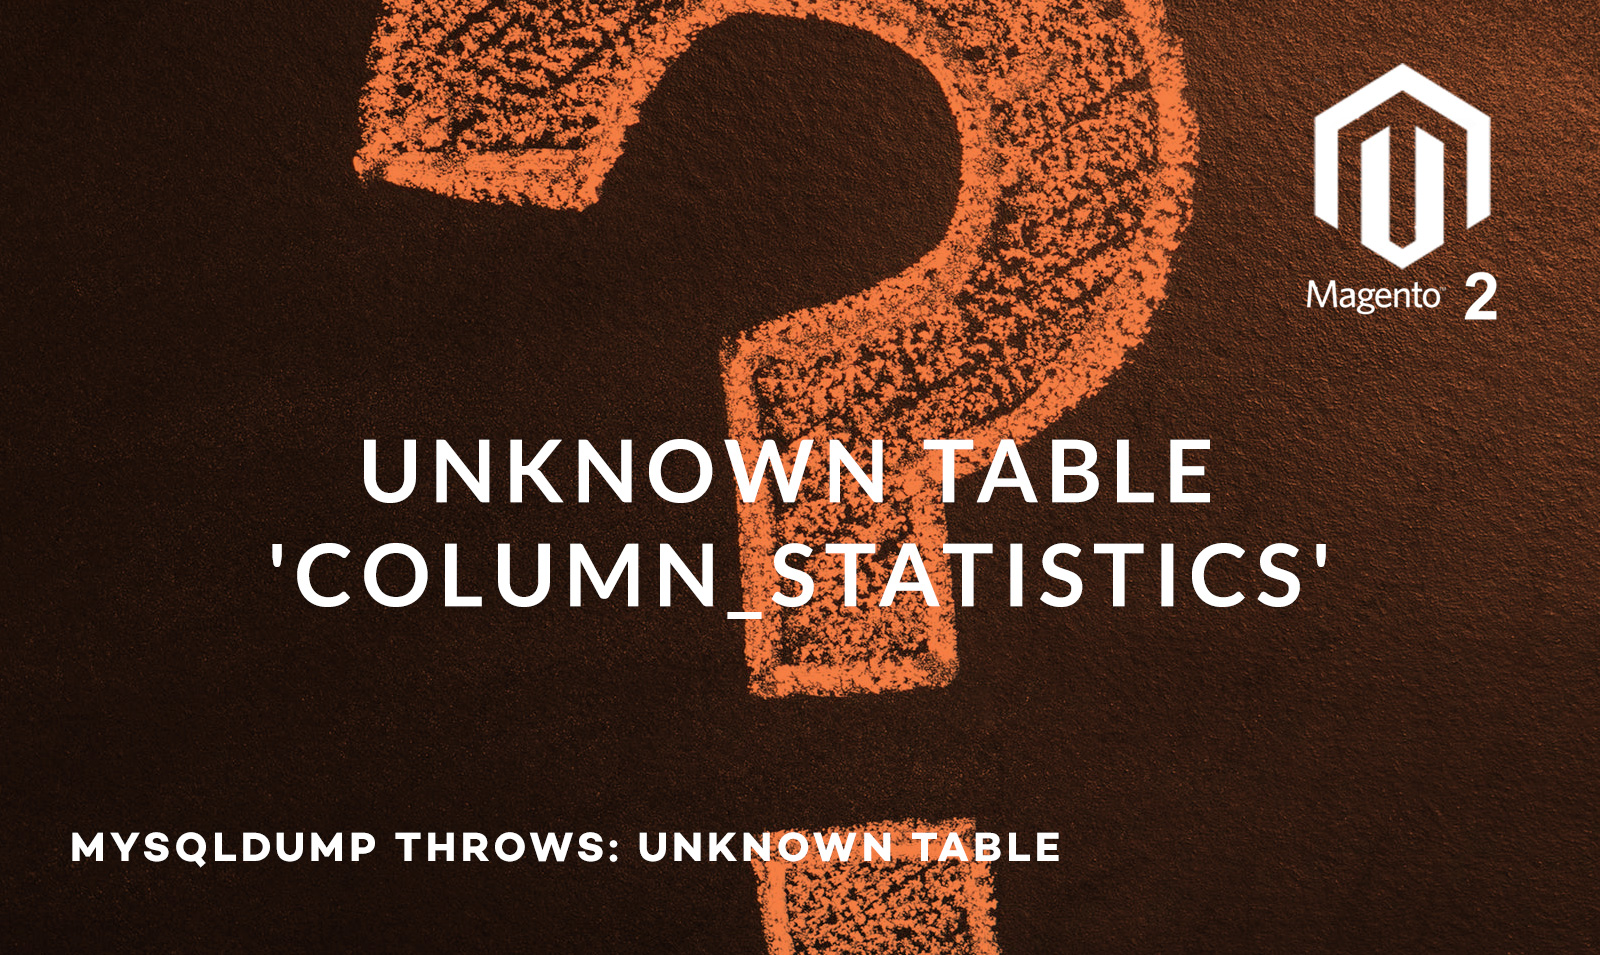 Magento throws unknown table